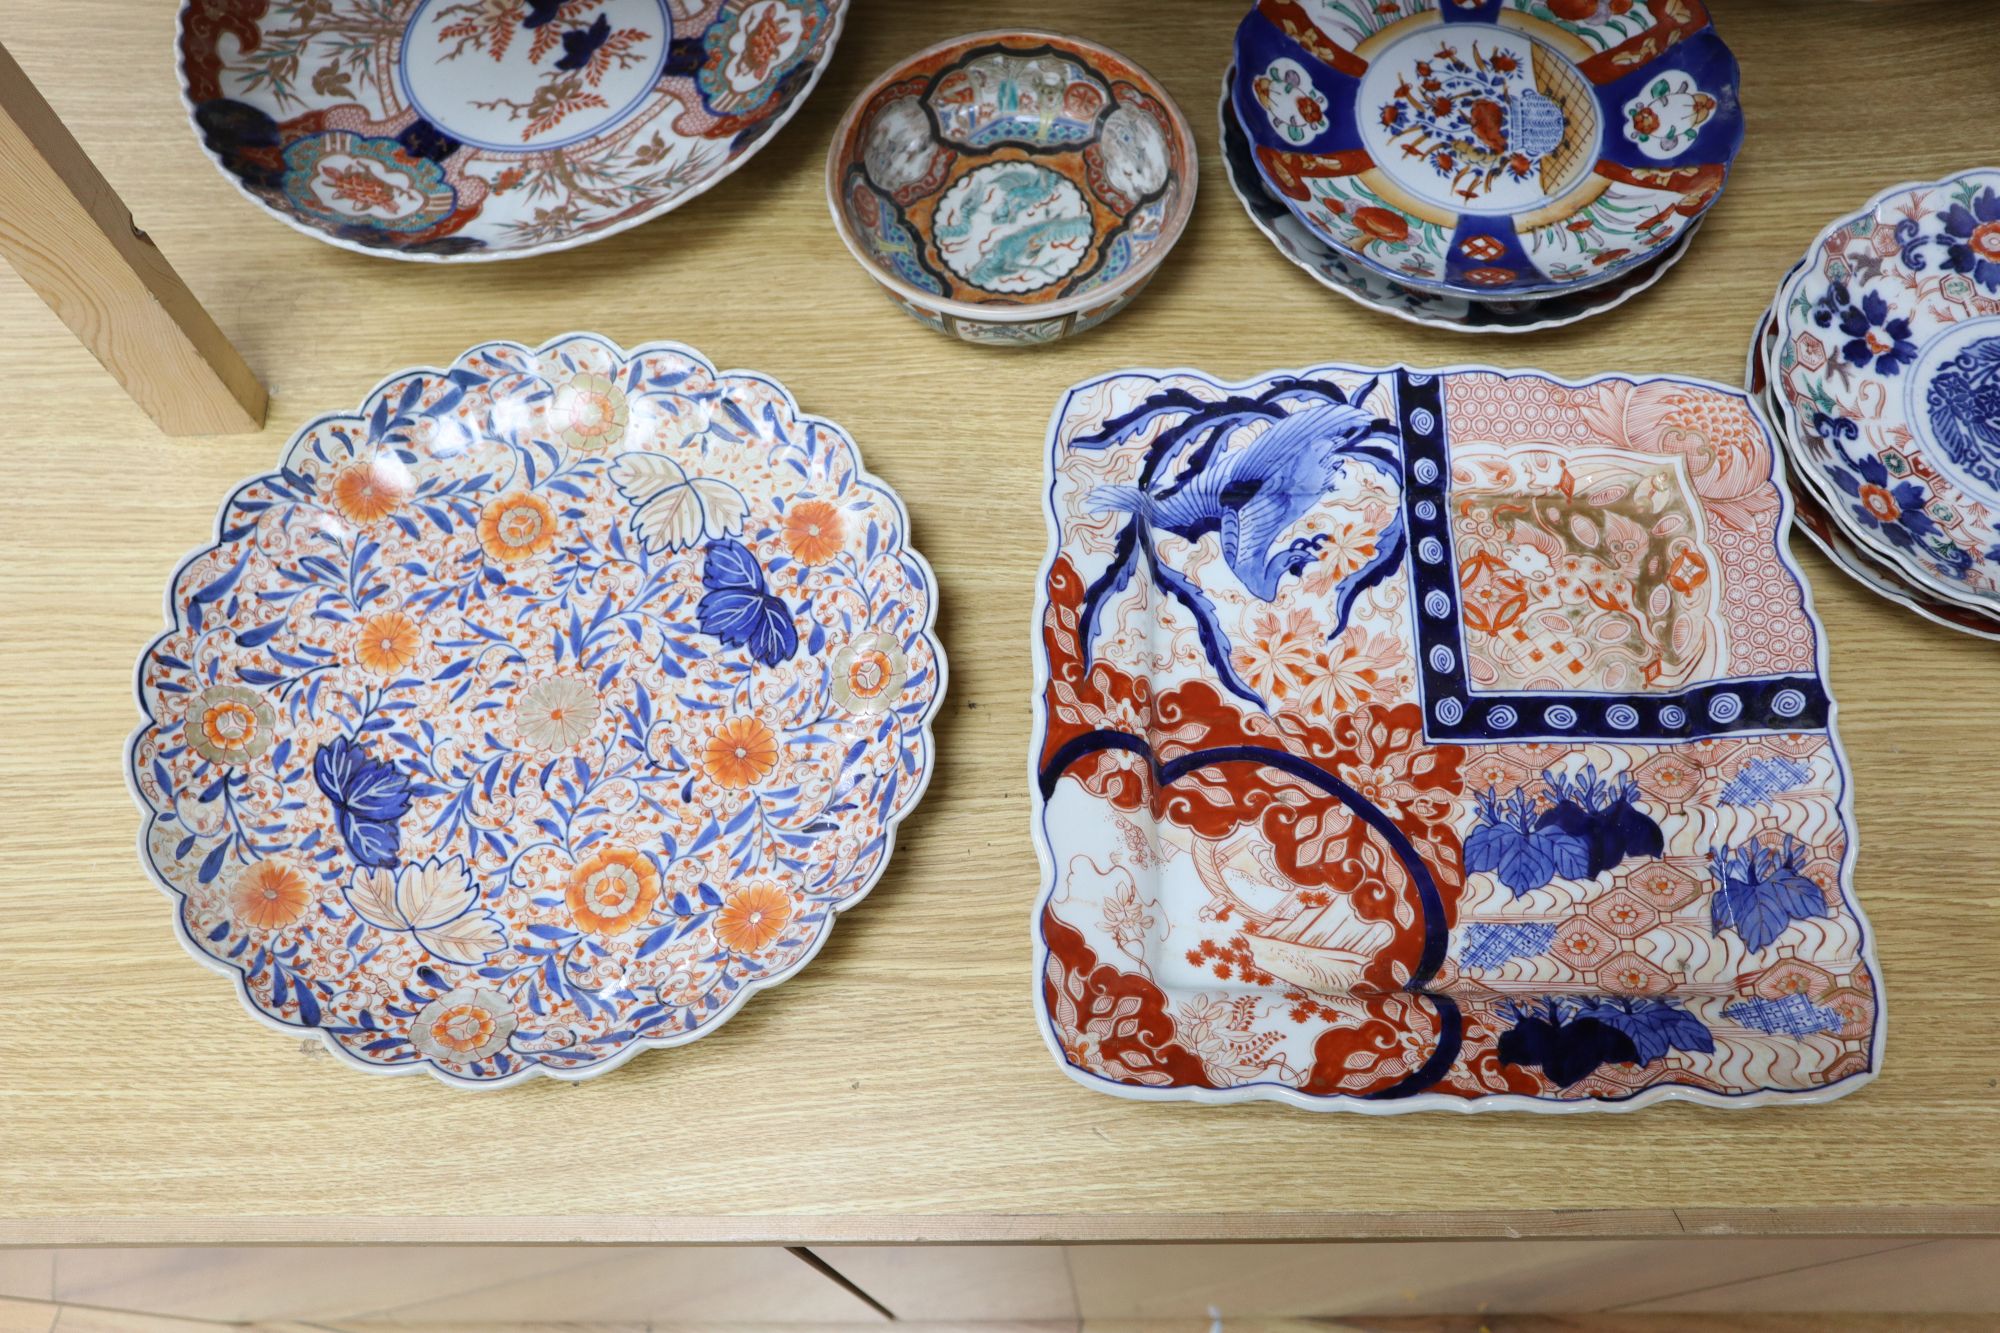 A collection of Japanese Imari dishes, bowls and a large square dish